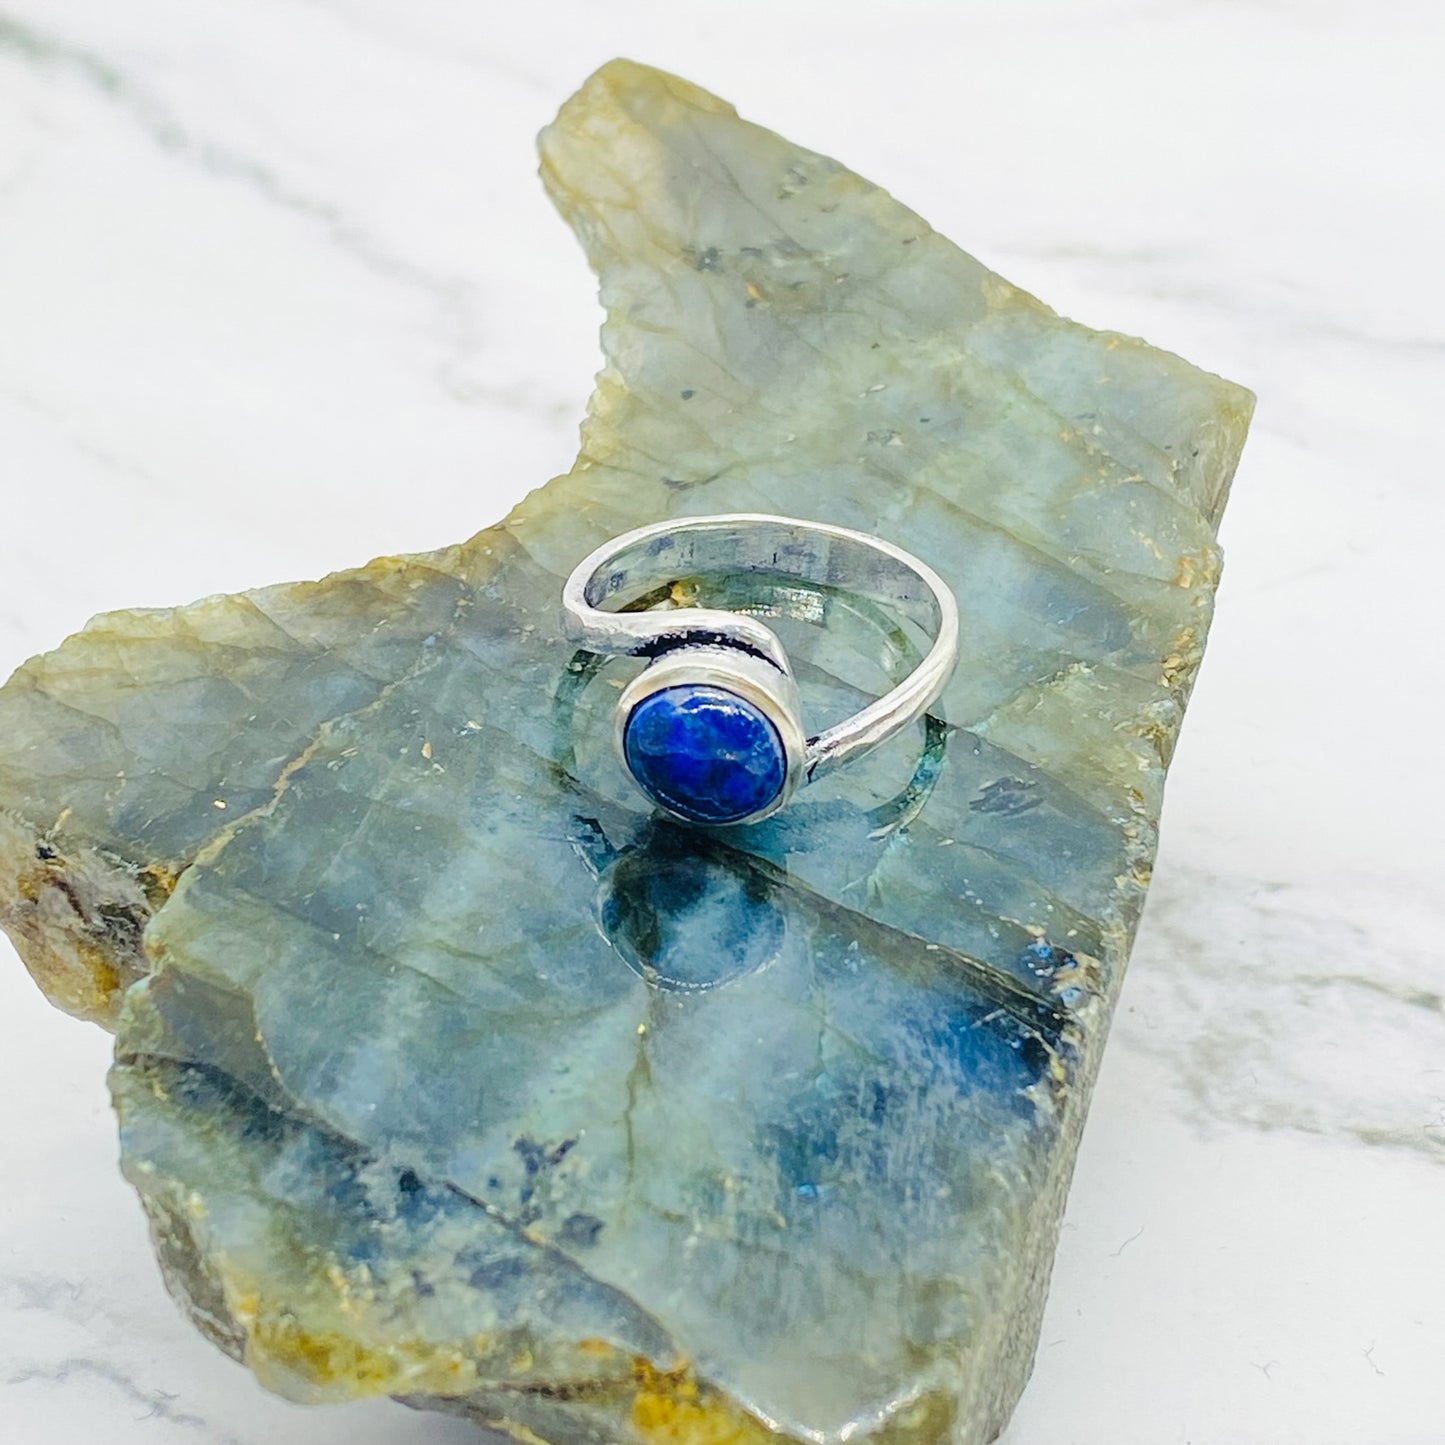 Sterling Silver Stackable Rings, Crystal Rings, Spiral Design Ring, Handmade Jewelry, Boho Style, Gift For Mom, Non Tarnish Ring